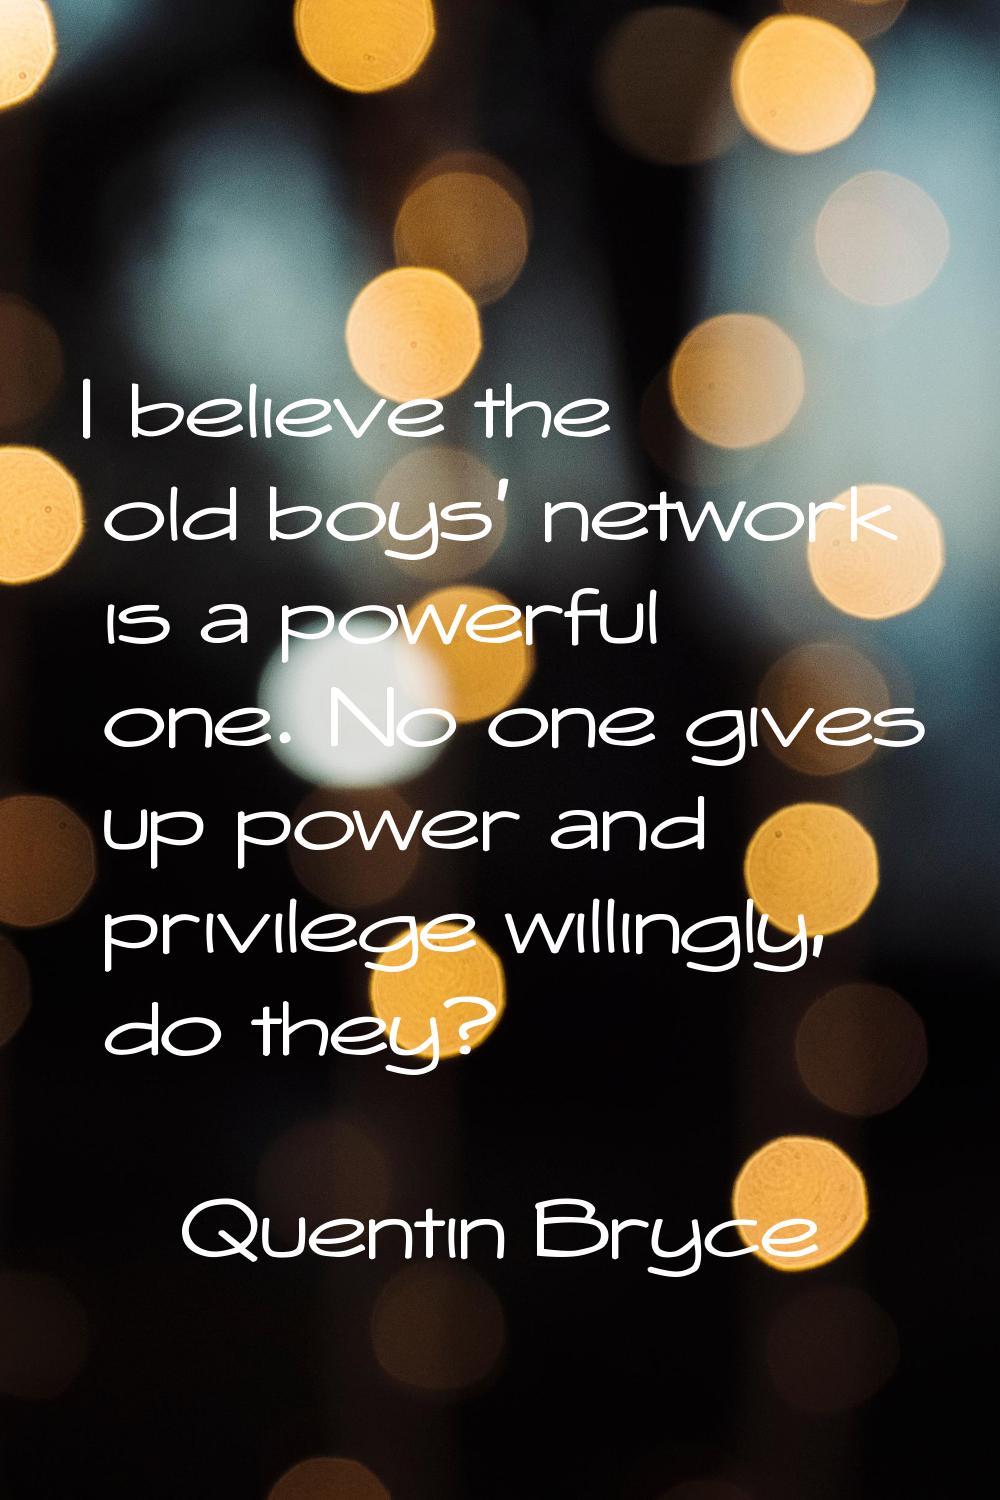 I believe the old boys' network is a powerful one. No one gives up power and privilege willingly, d